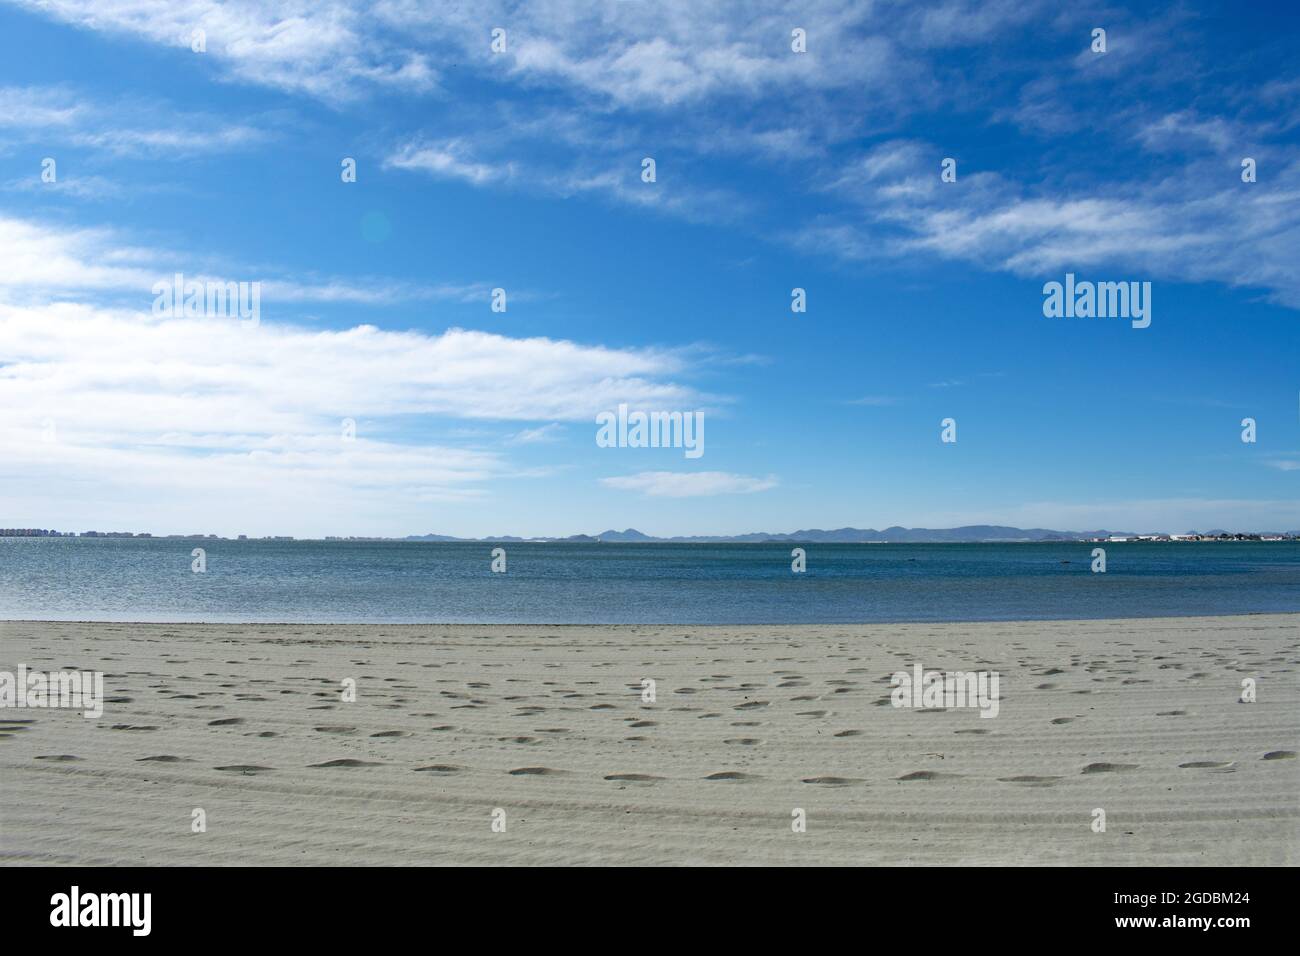 Fine sand beach at Lo Pagan on the Mar Menor, Murcia, Spain.  Spring day with clear blue skies and pristine sands, by peaceful blue waters. Stock Photo